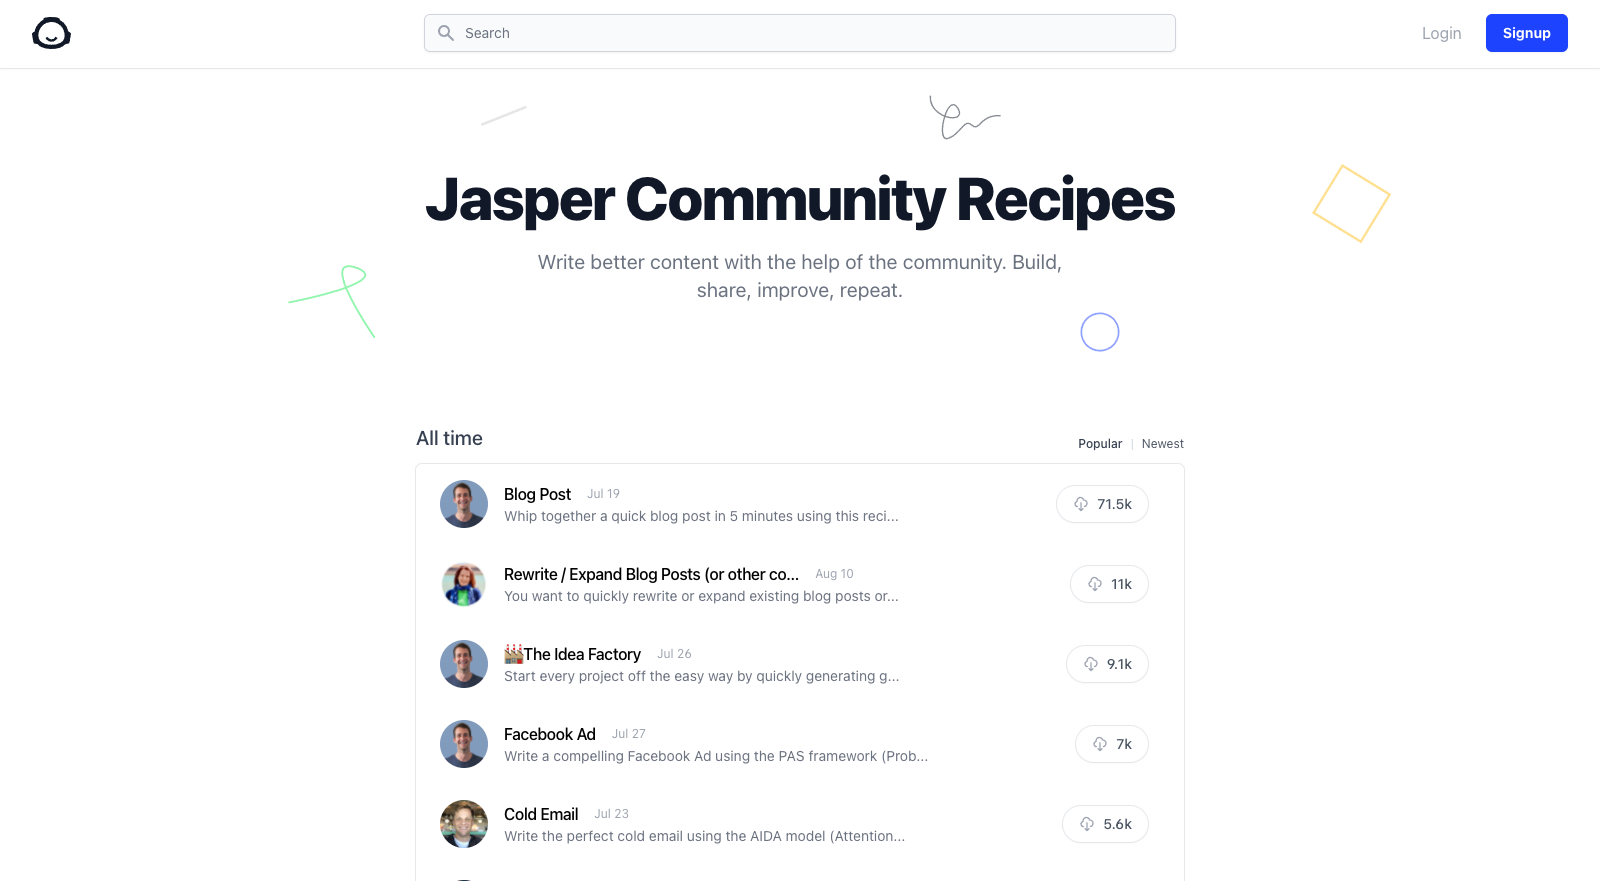 An image showing all the recipes Jasper AI offers.